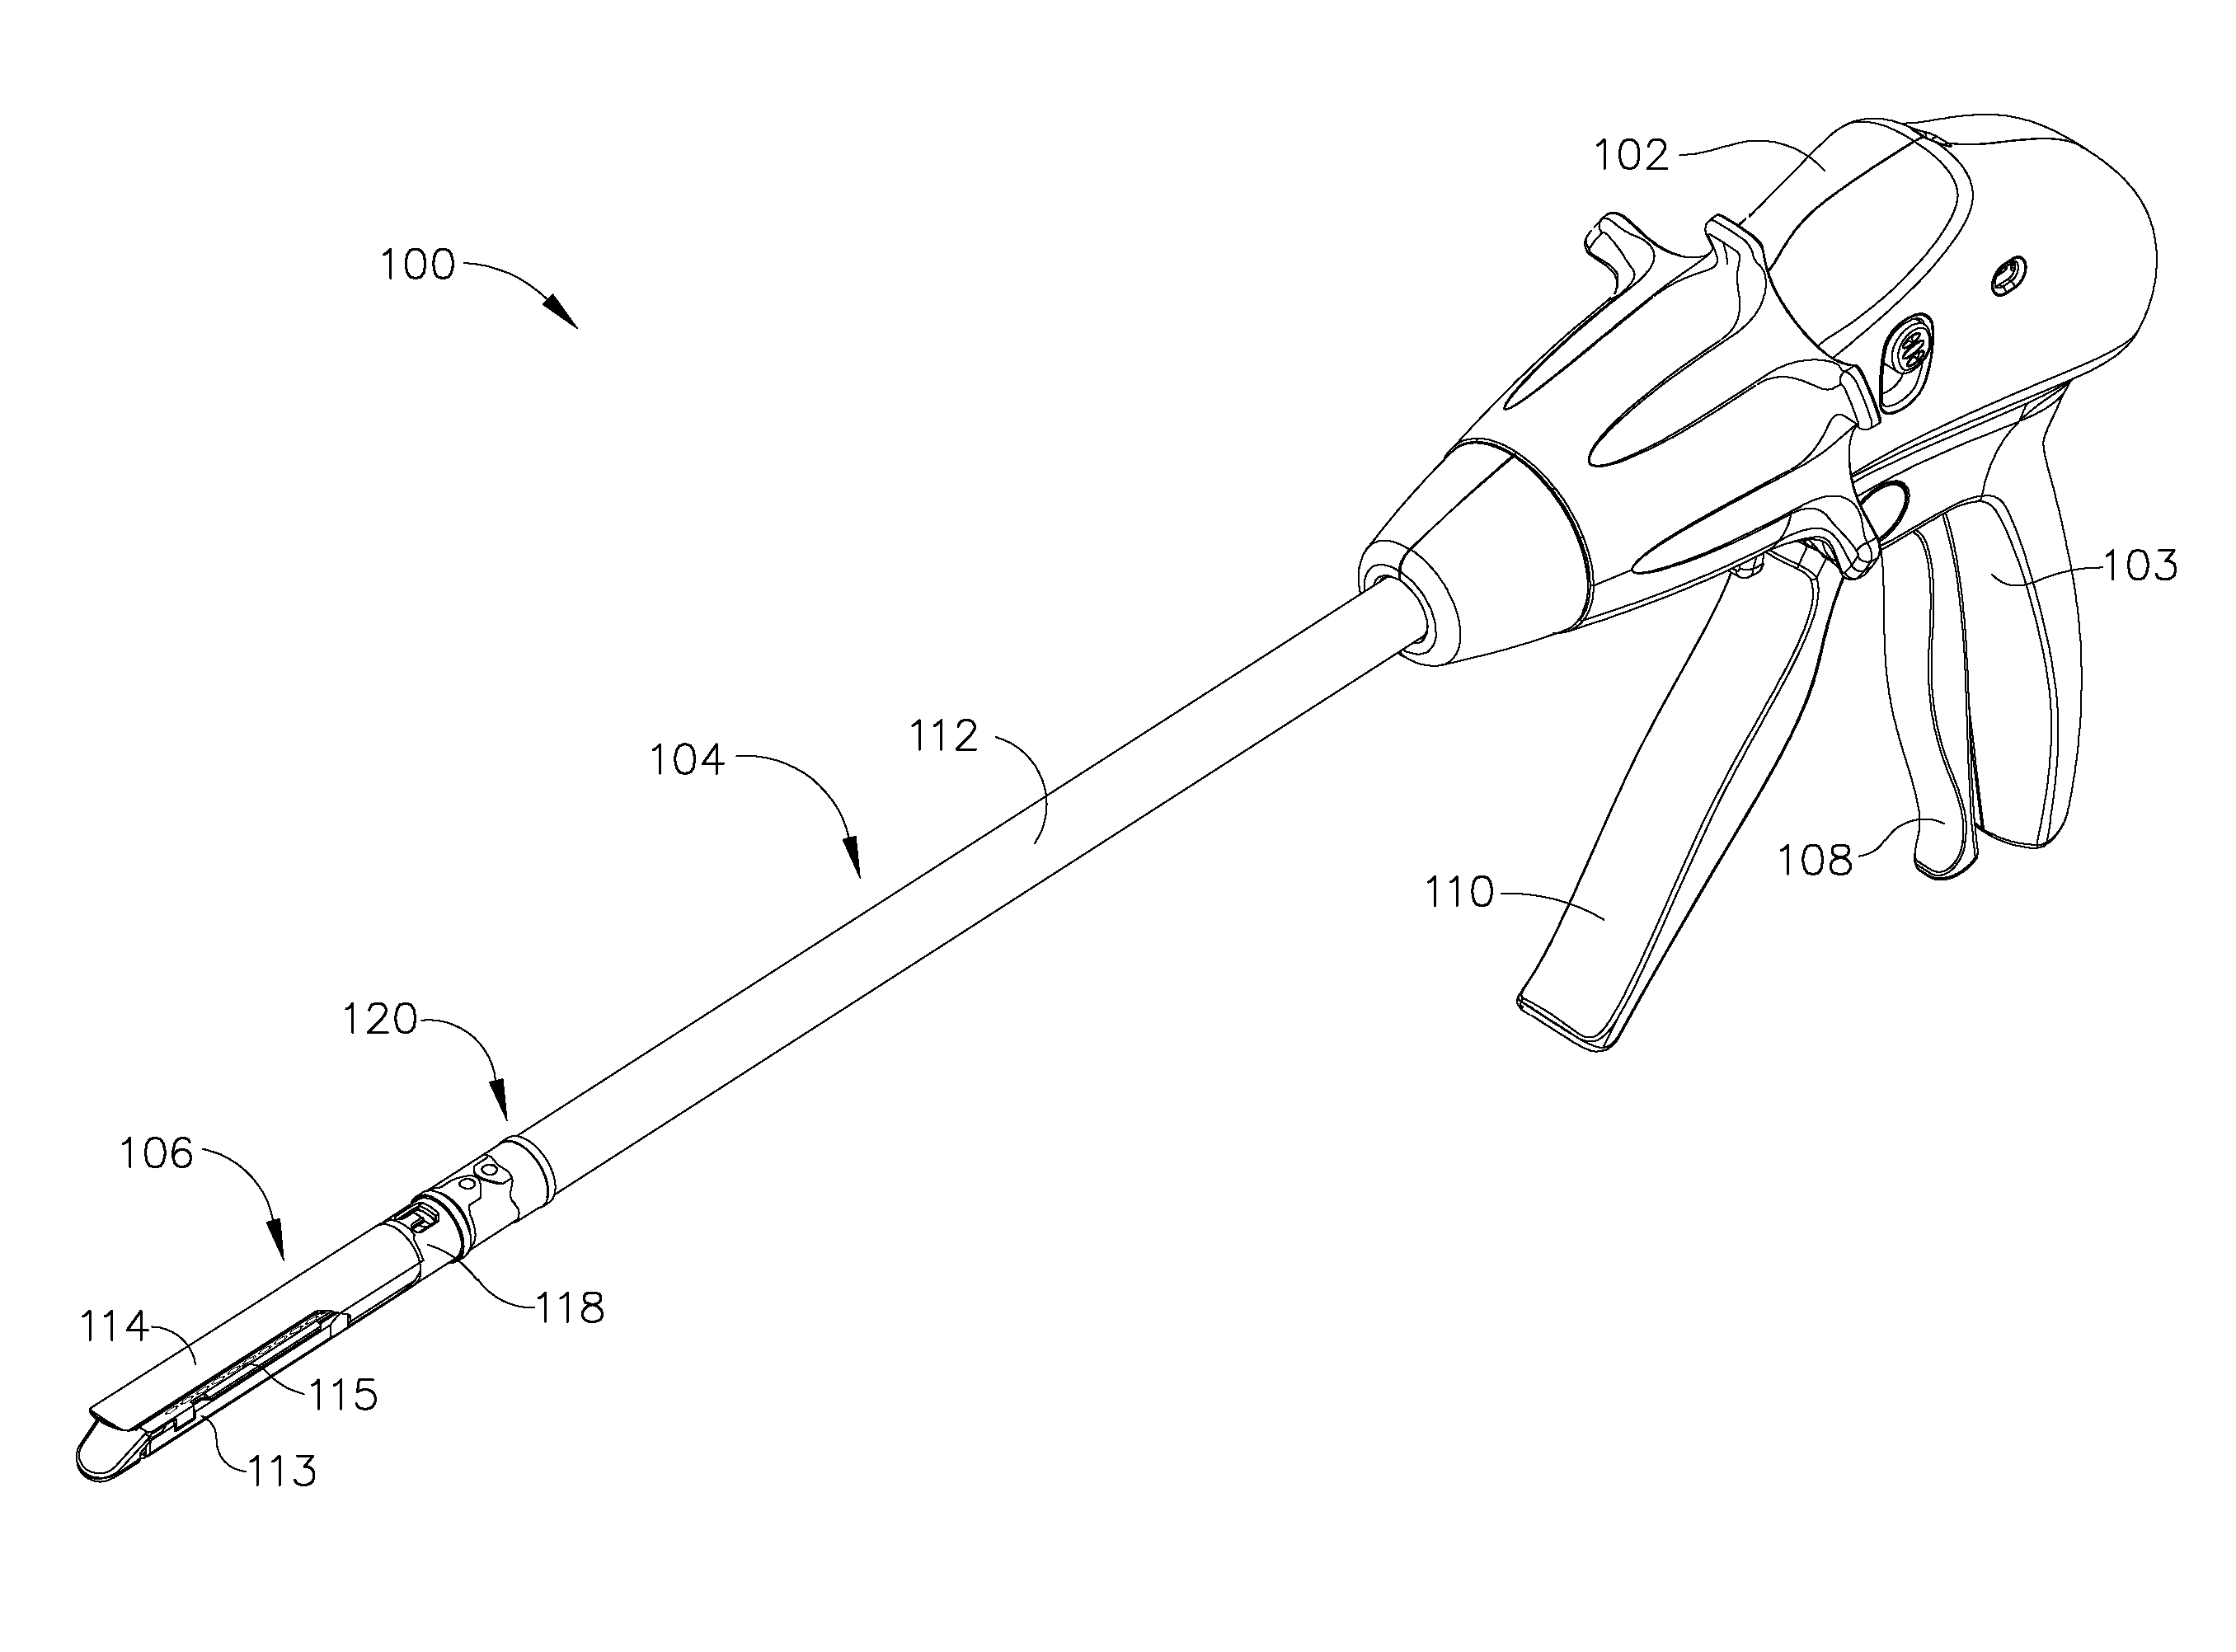 Surgical stapling instrument comprising a magnetic element driver